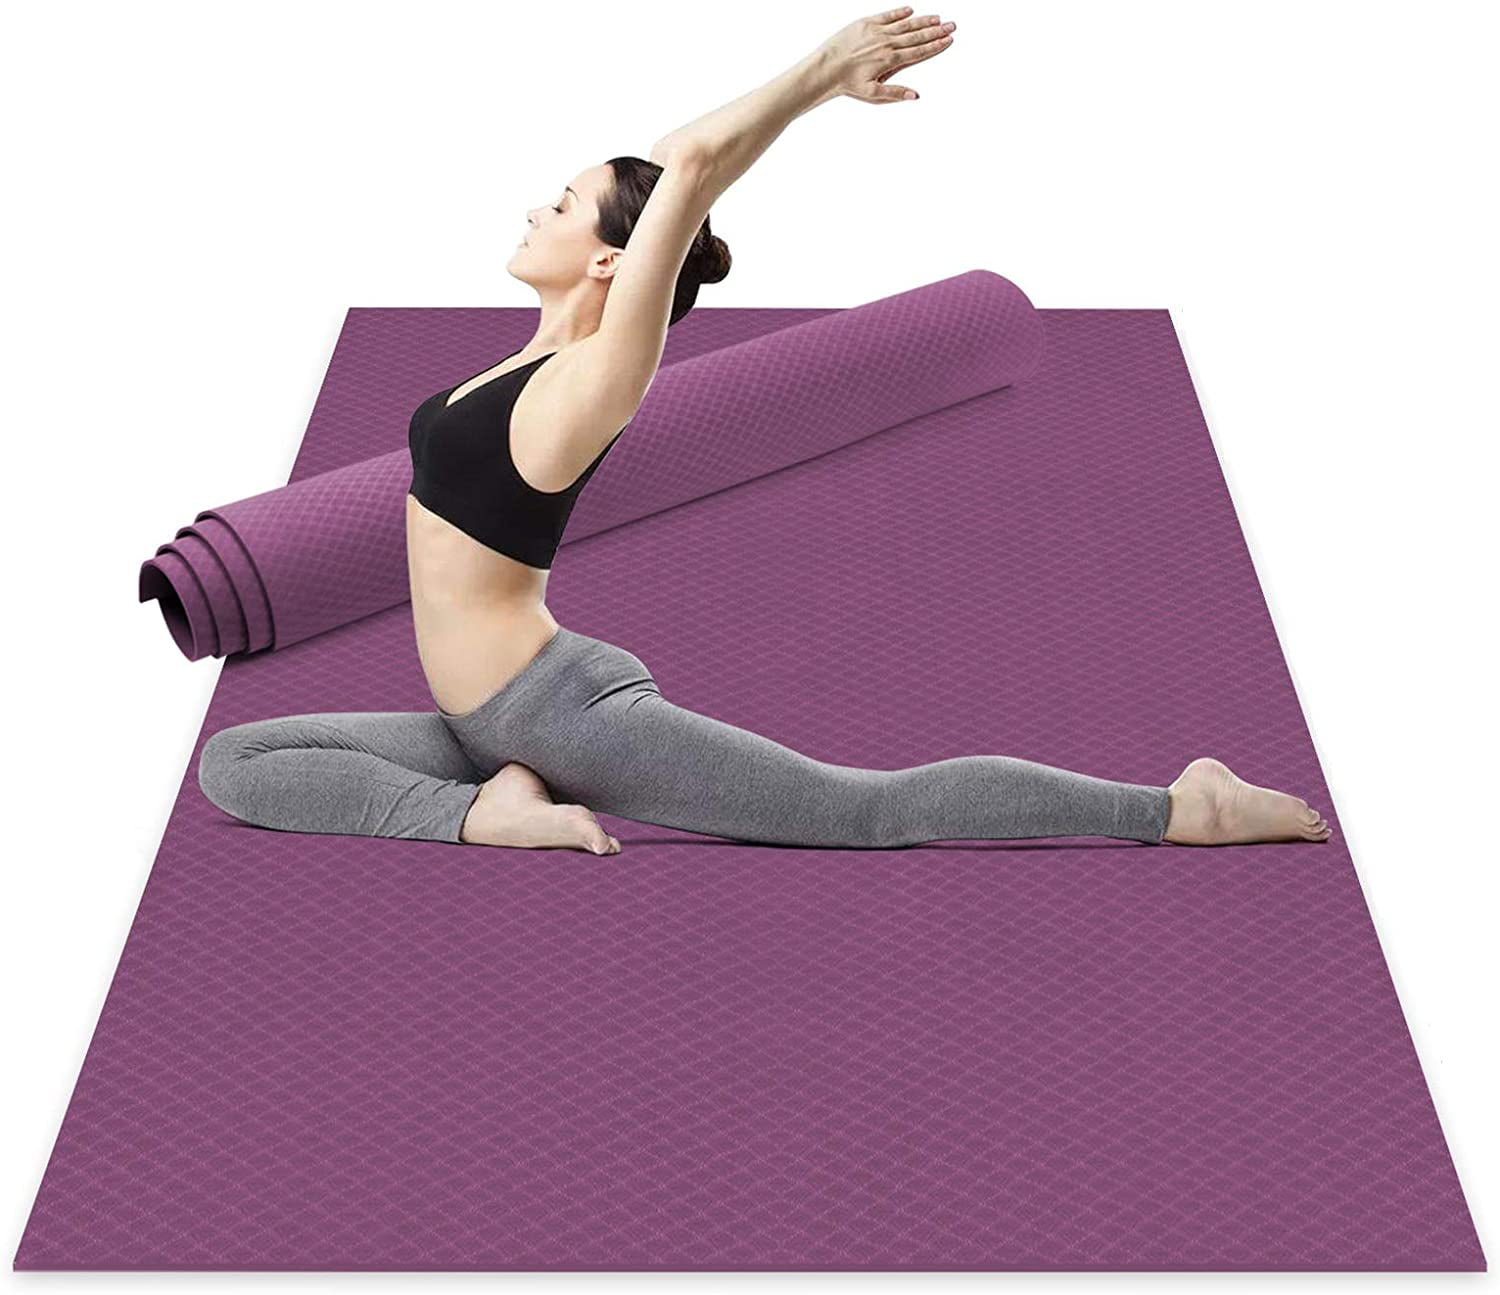 Professional Non-Slip Sweat-Proof TPE Extra Wide Yoga Mat for Fitness Workout Stretching Pilates Training 6'x 4'x 6 mm 72x 48 Little Fish Large Exercise Mat for Men Women Home Gym 